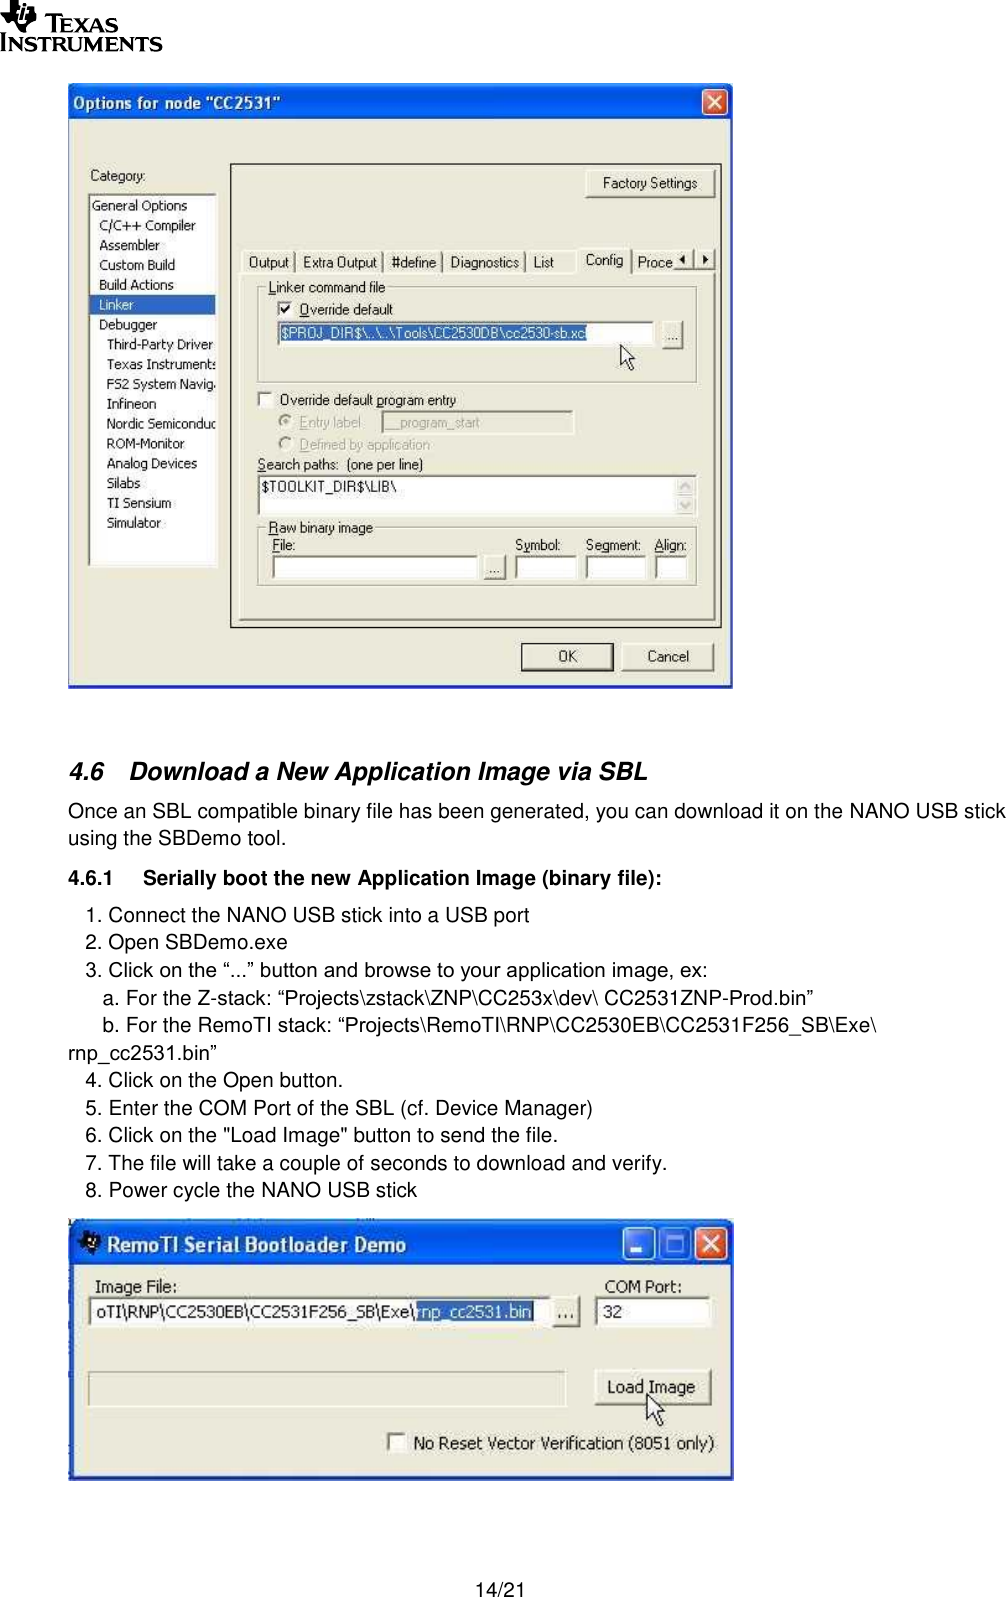       14/21   4.6 Download a New Application Image via SBL Once an SBL compatible binary file has been generated, you can download it on the NANO USB stick using the SBDemo tool. 4.6.1 Serially boot the new Application Image (binary file):    1. Connect the NANO USB stick into a USB port    2. Open SBDemo.exe    3. Click on the “...” button and browse to your application image, ex:       a. For the Z-stack: “Projects\zstack\ZNP\CC253x\dev\ CC2531ZNP-Prod.bin”       b. For the RemoTI stack: “Projects\RemoTI\RNP\CC2530EB\CC2531F256_SB\Exe\ rnp_cc2531.bin”    4. Click on the Open button.    5. Enter the COM Port of the SBL (cf. Device Manager)    6. Click on the &quot;Load Image&quot; button to send the file.     7. The file will take a couple of seconds to download and verify.     8. Power cycle the NANO USB stick   